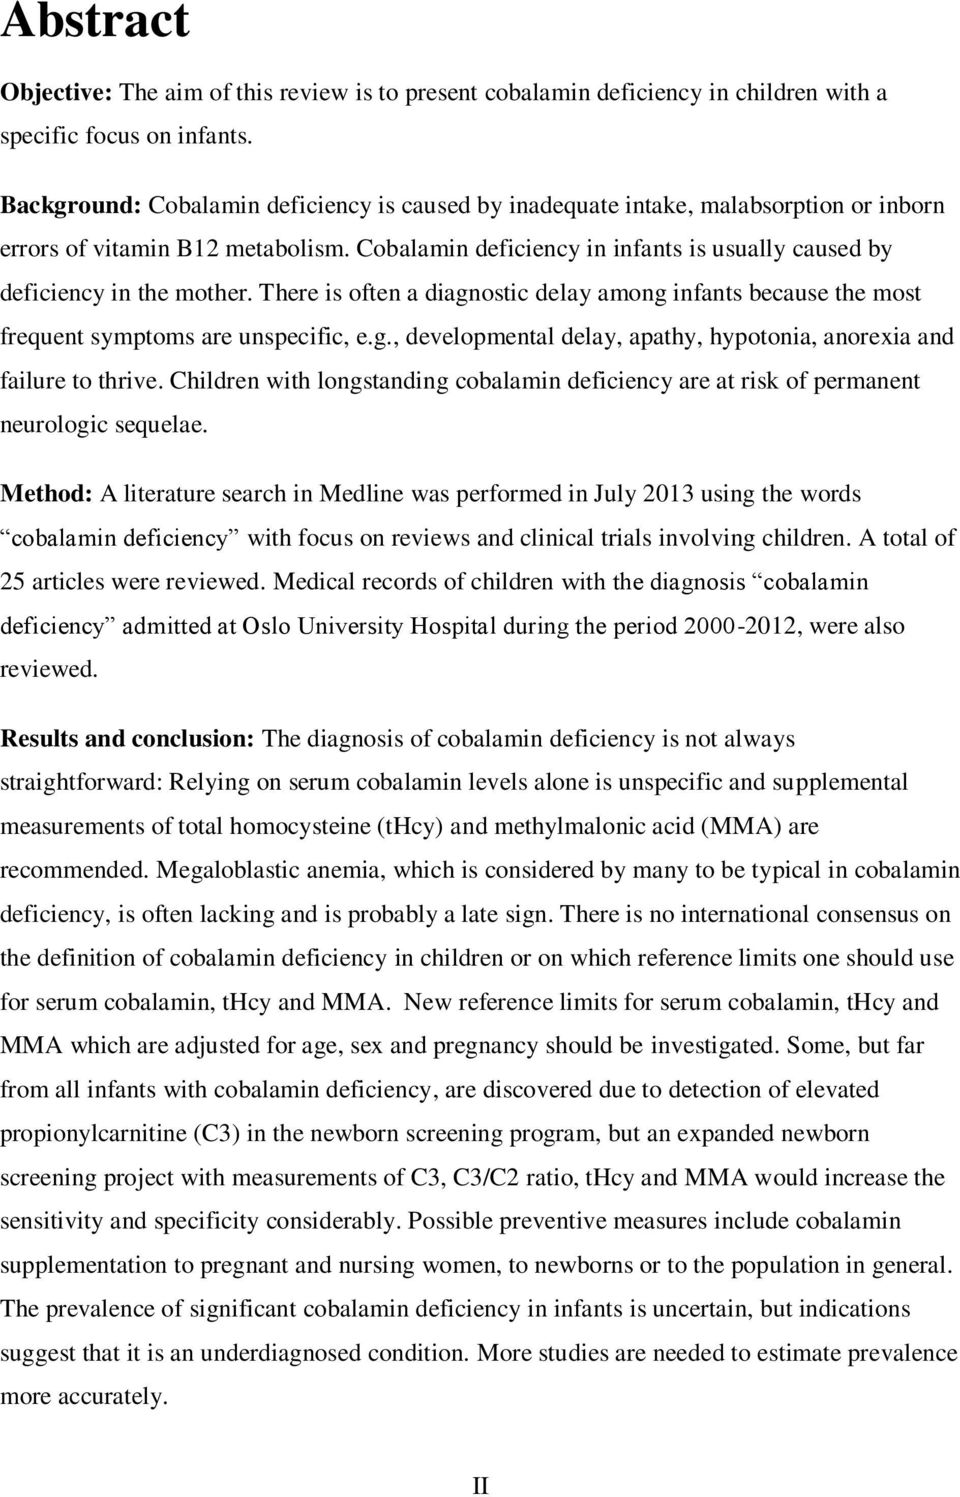 Cobalamin deficiency in infants is usually caused by deficiency in the mother. There is often a diagnostic delay among infants because the most frequent symptoms are unspecific, e.g., developmental delay, apathy, hypotonia, anorexia and failure to thrive.